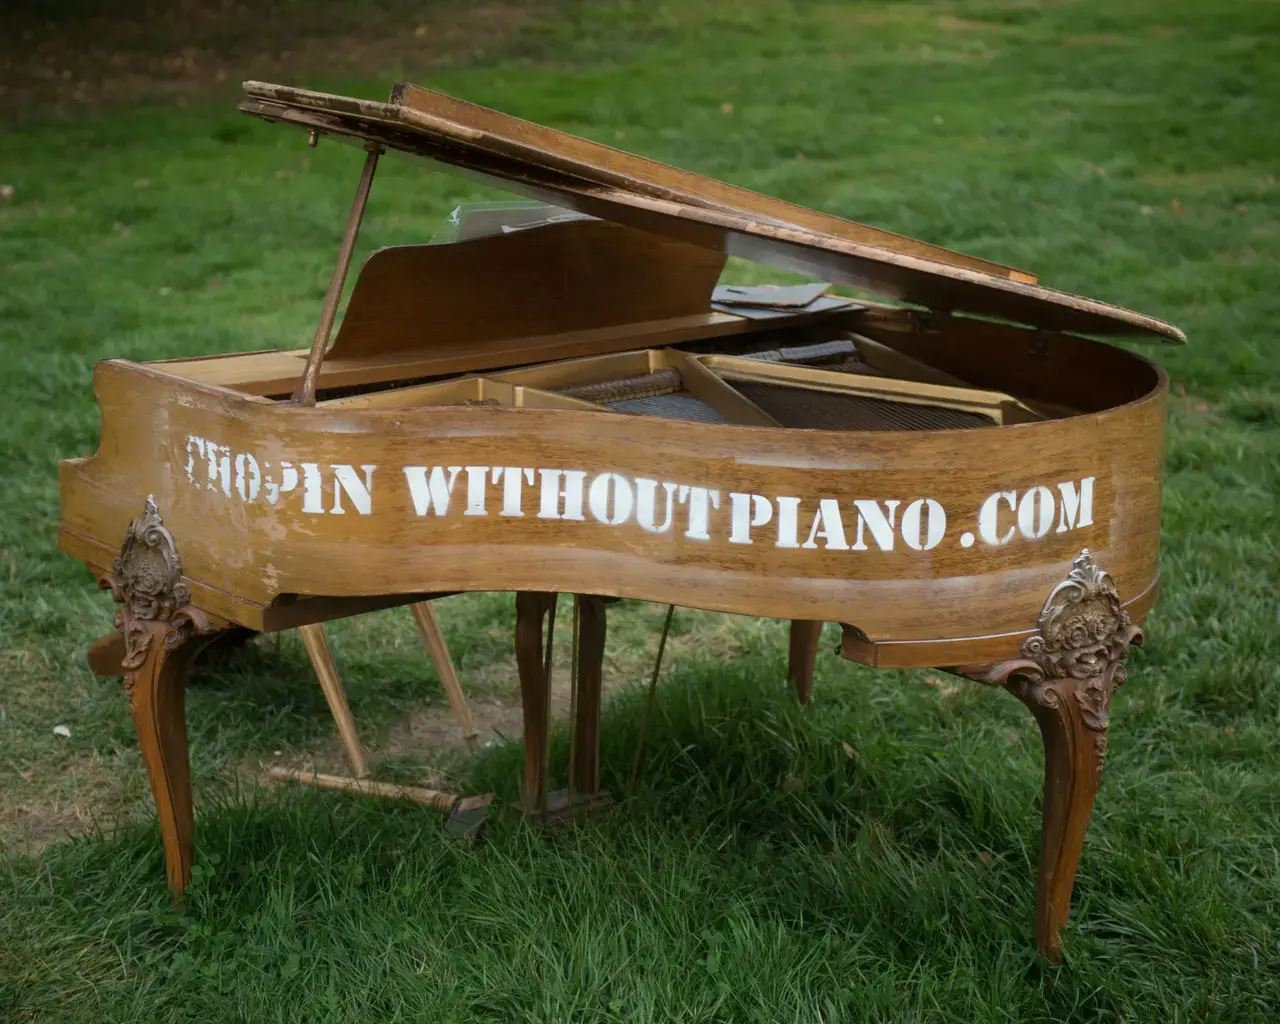 Lost Pianos&nbsp;at Swarthmore College. Photo by JJ Tiziou. Courtesy of Swarthmore College.